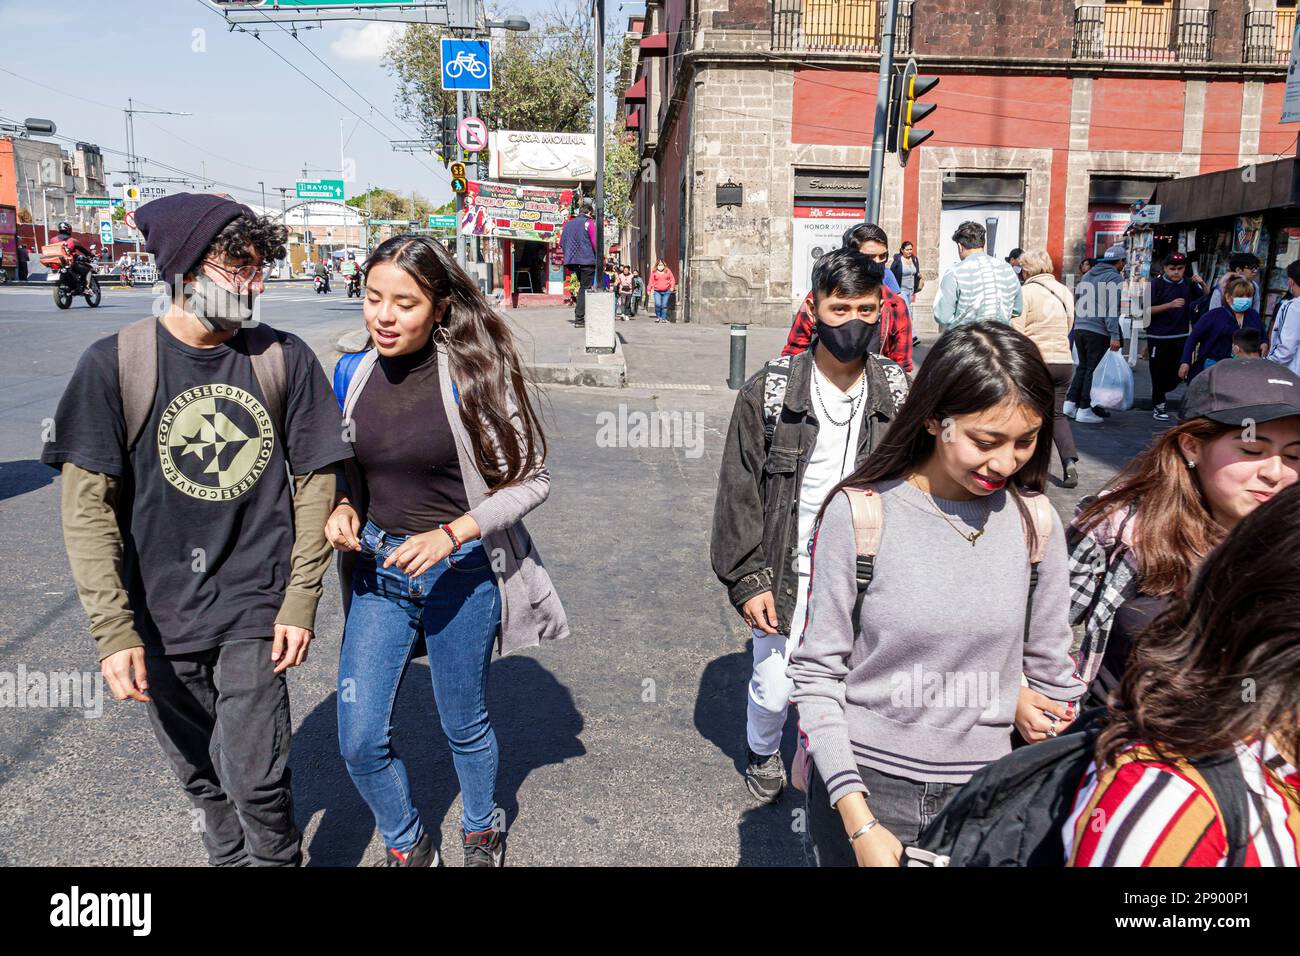 Mexico City,young teen teens teenage teenager teenagers,youth culture friends adolescent,resident residents girl girls boy boys,pedestrian pedestrians Stock Photo